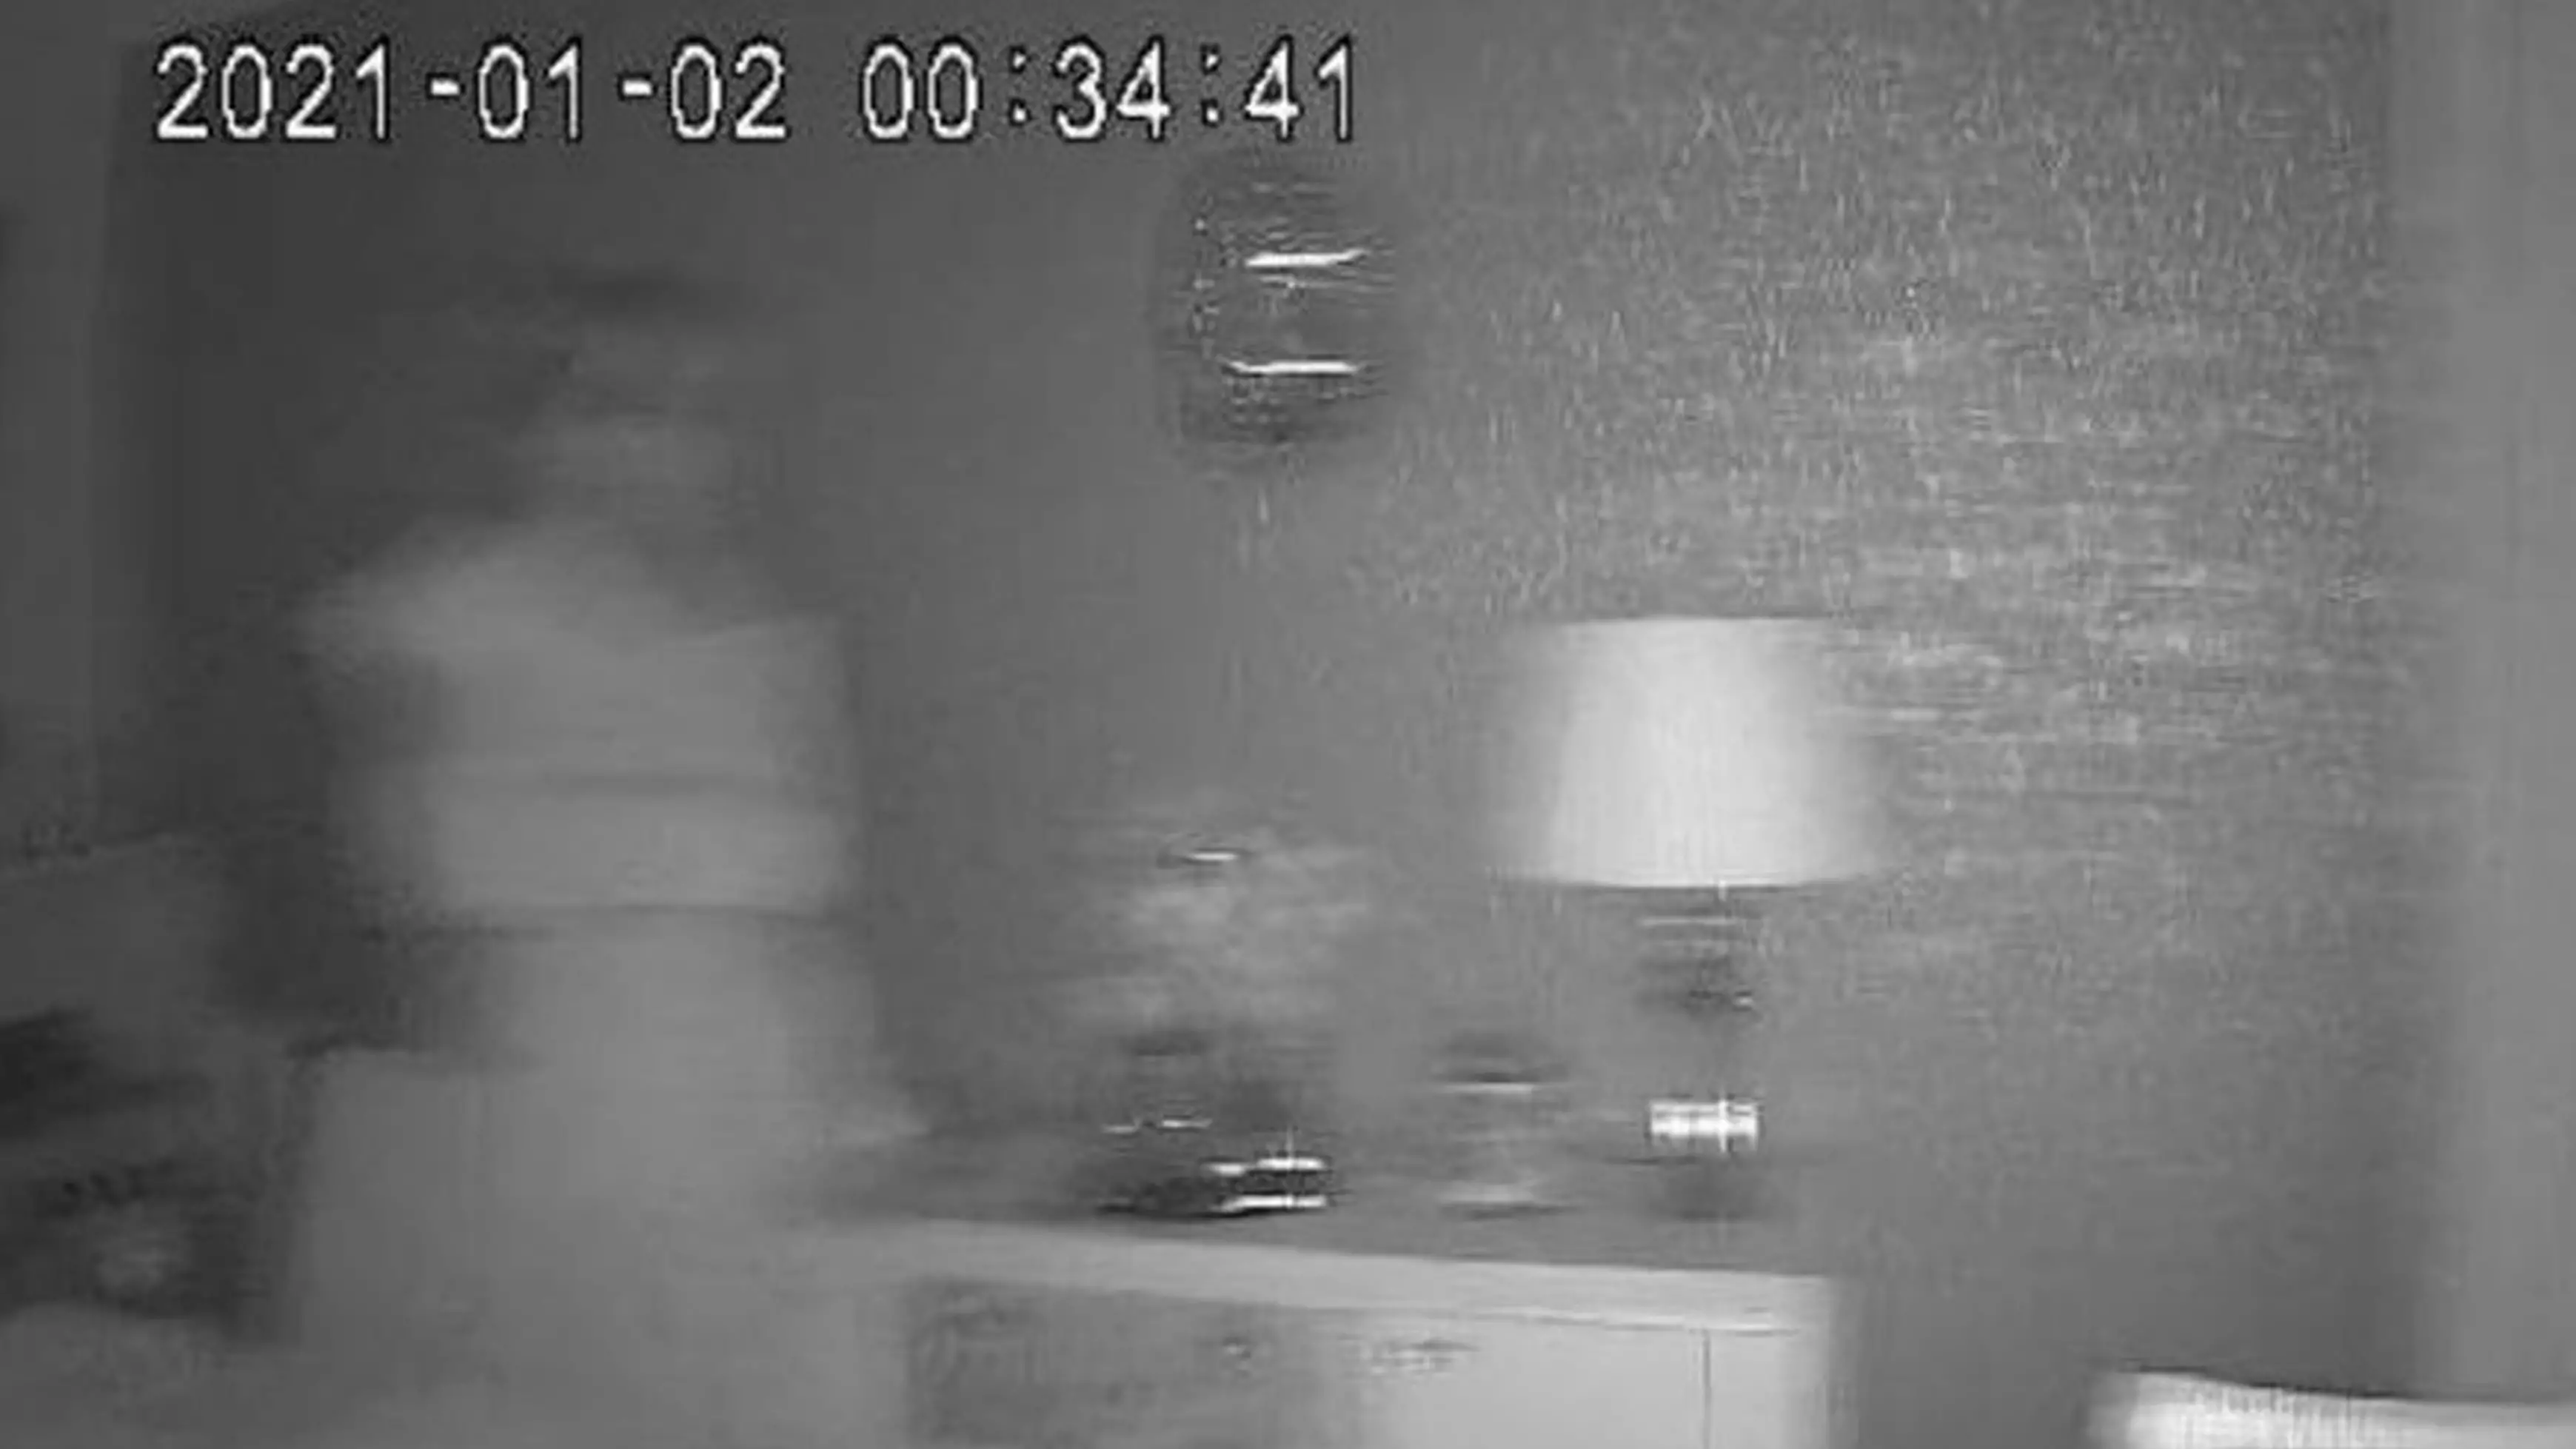 Couple Feel Like Someone Is Watching Them - Then CCTV Captures 'Ghost Bride'